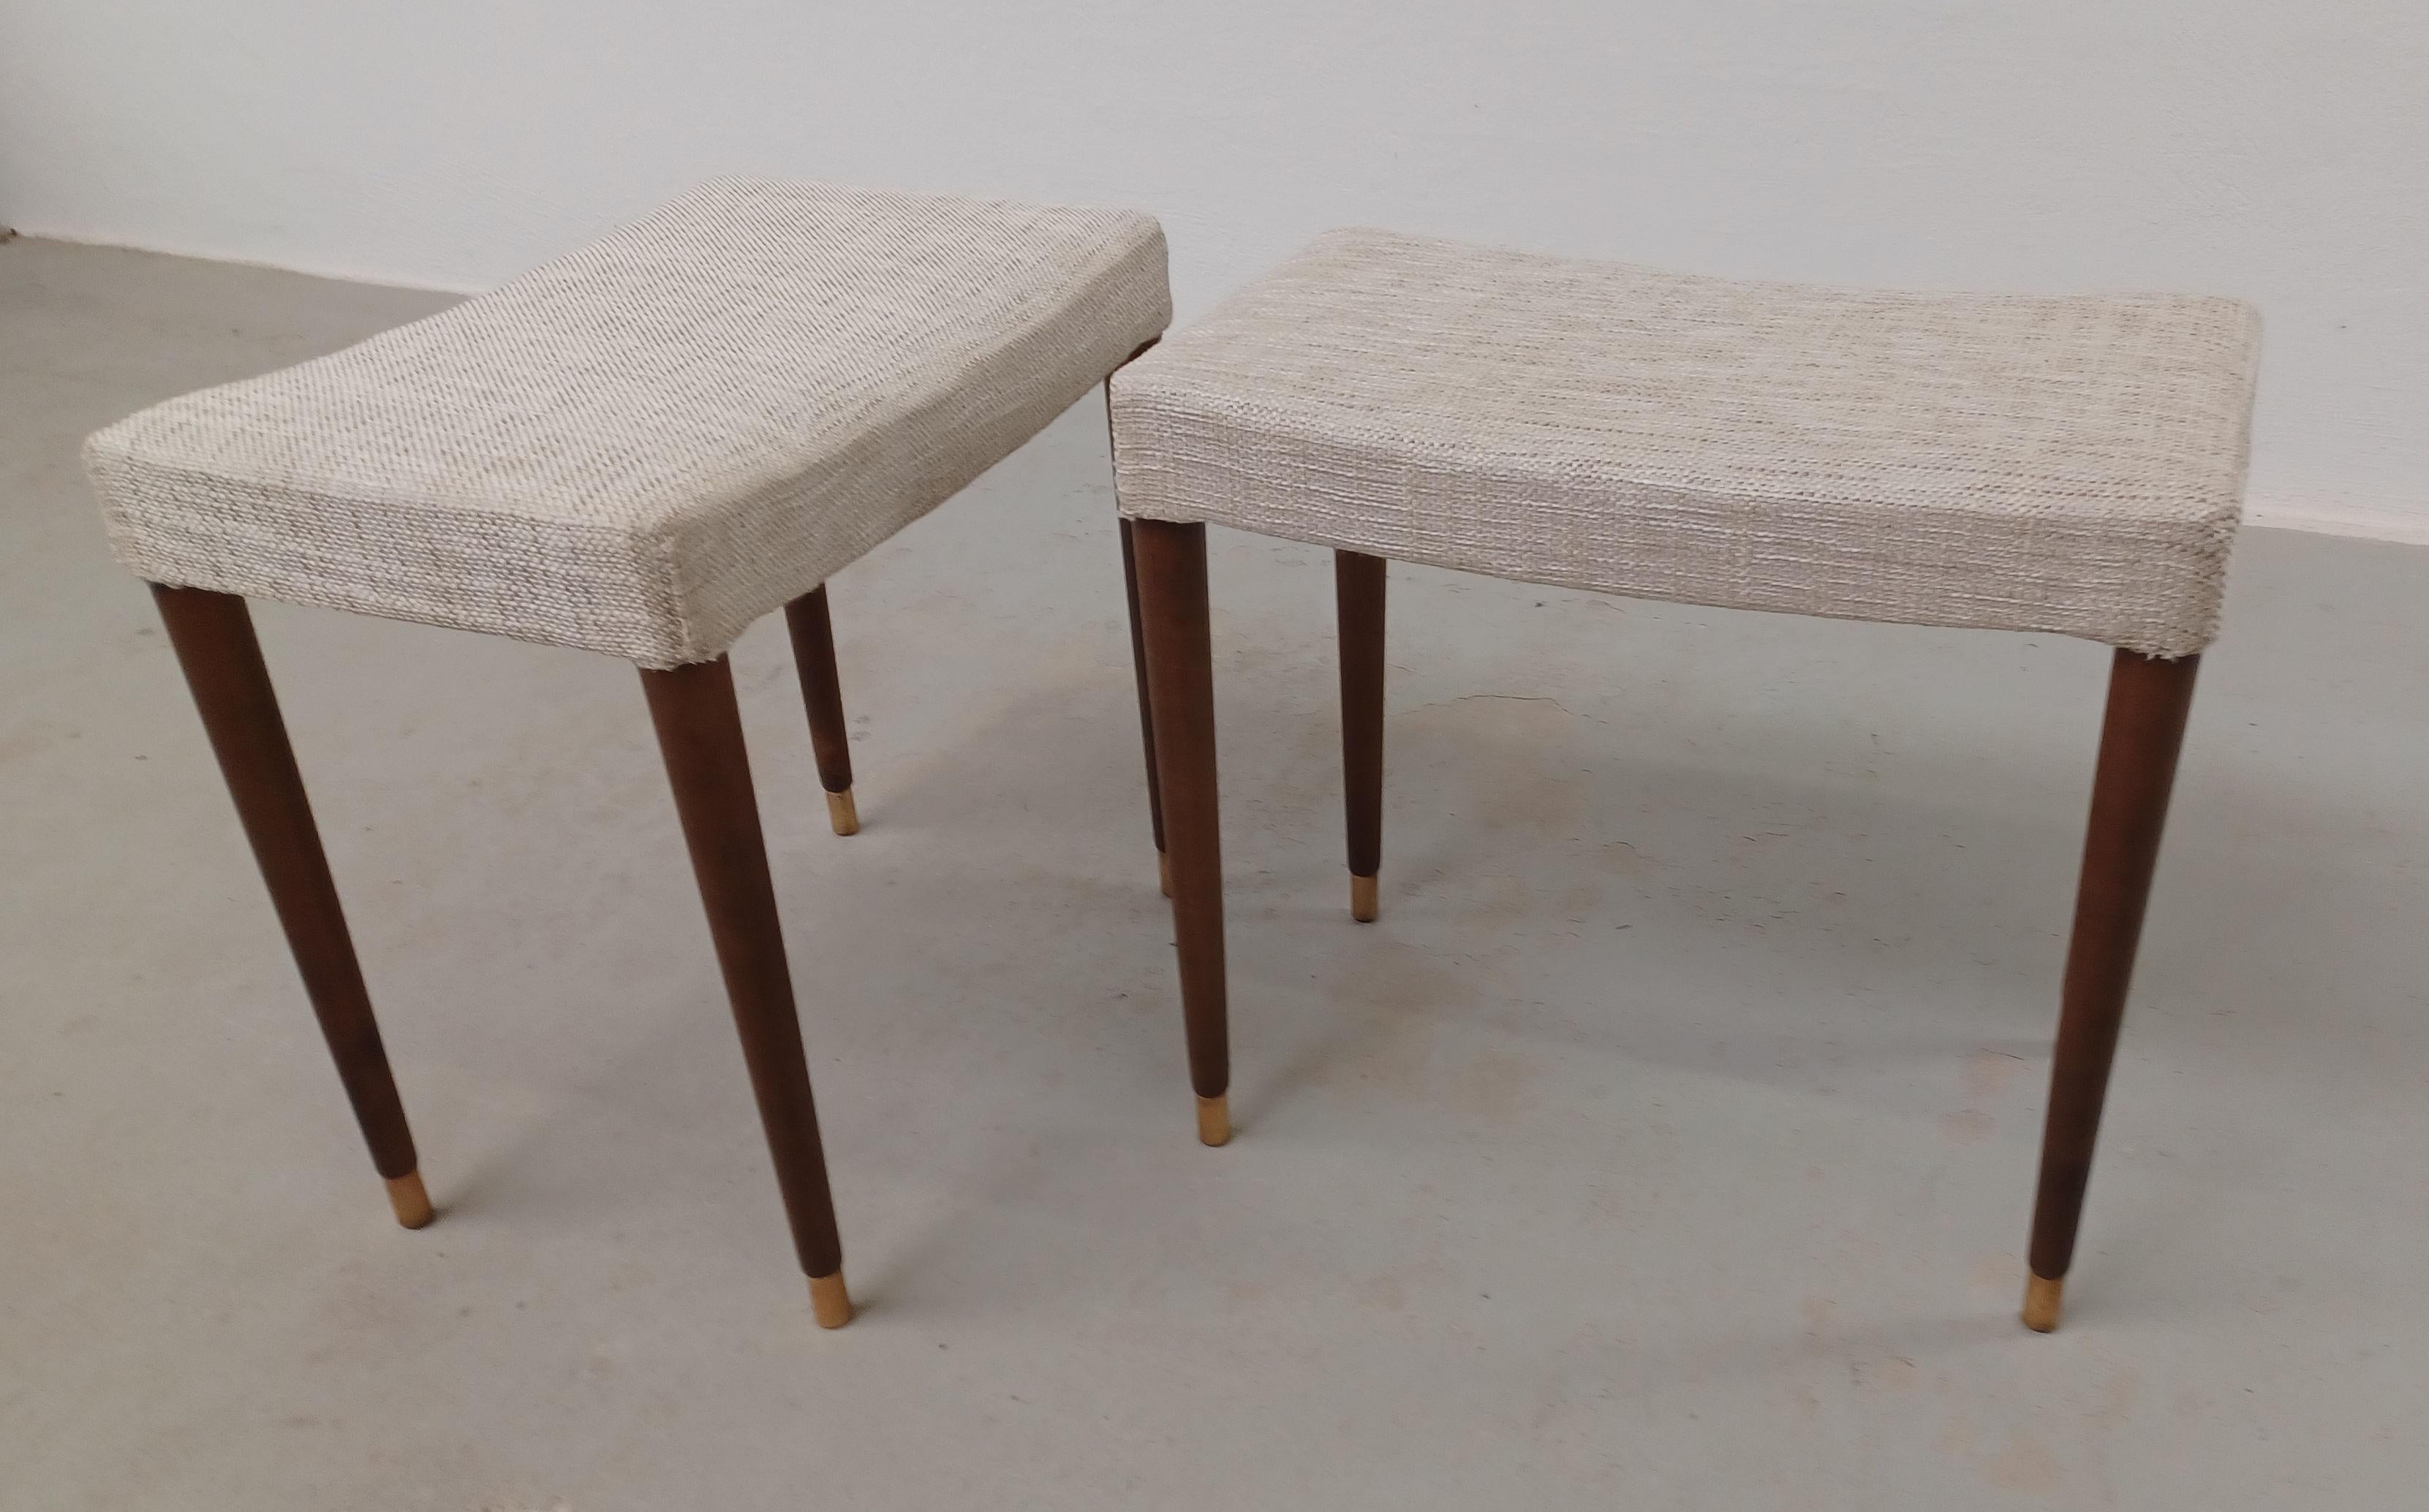 Hand-Crafted 1950's Set of Two Restored an Reupholstered Danish Mid-Century Modern stools For Sale